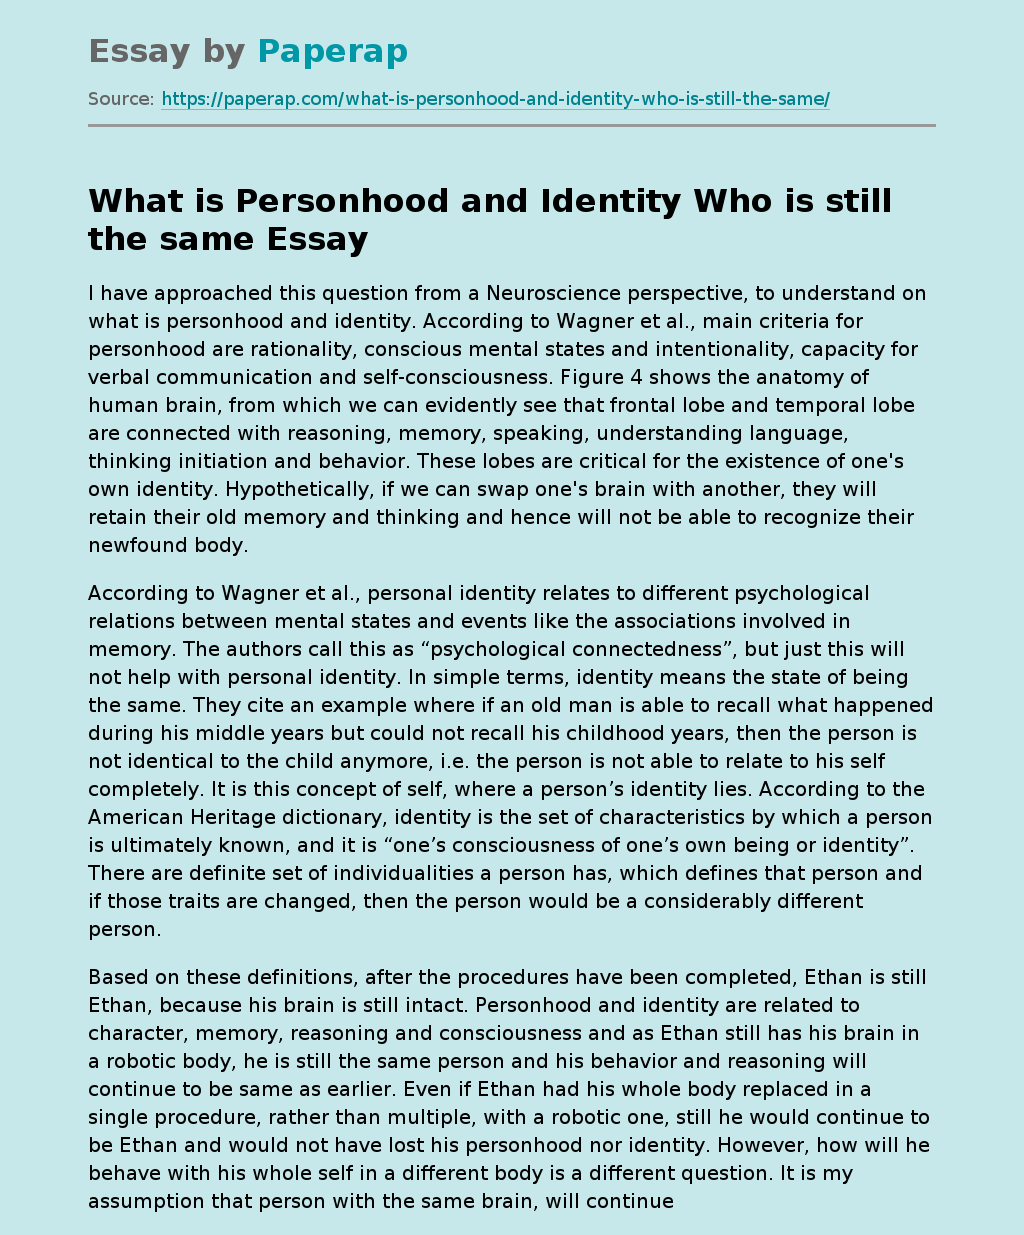 What is Personhood and Identity Who is still the same